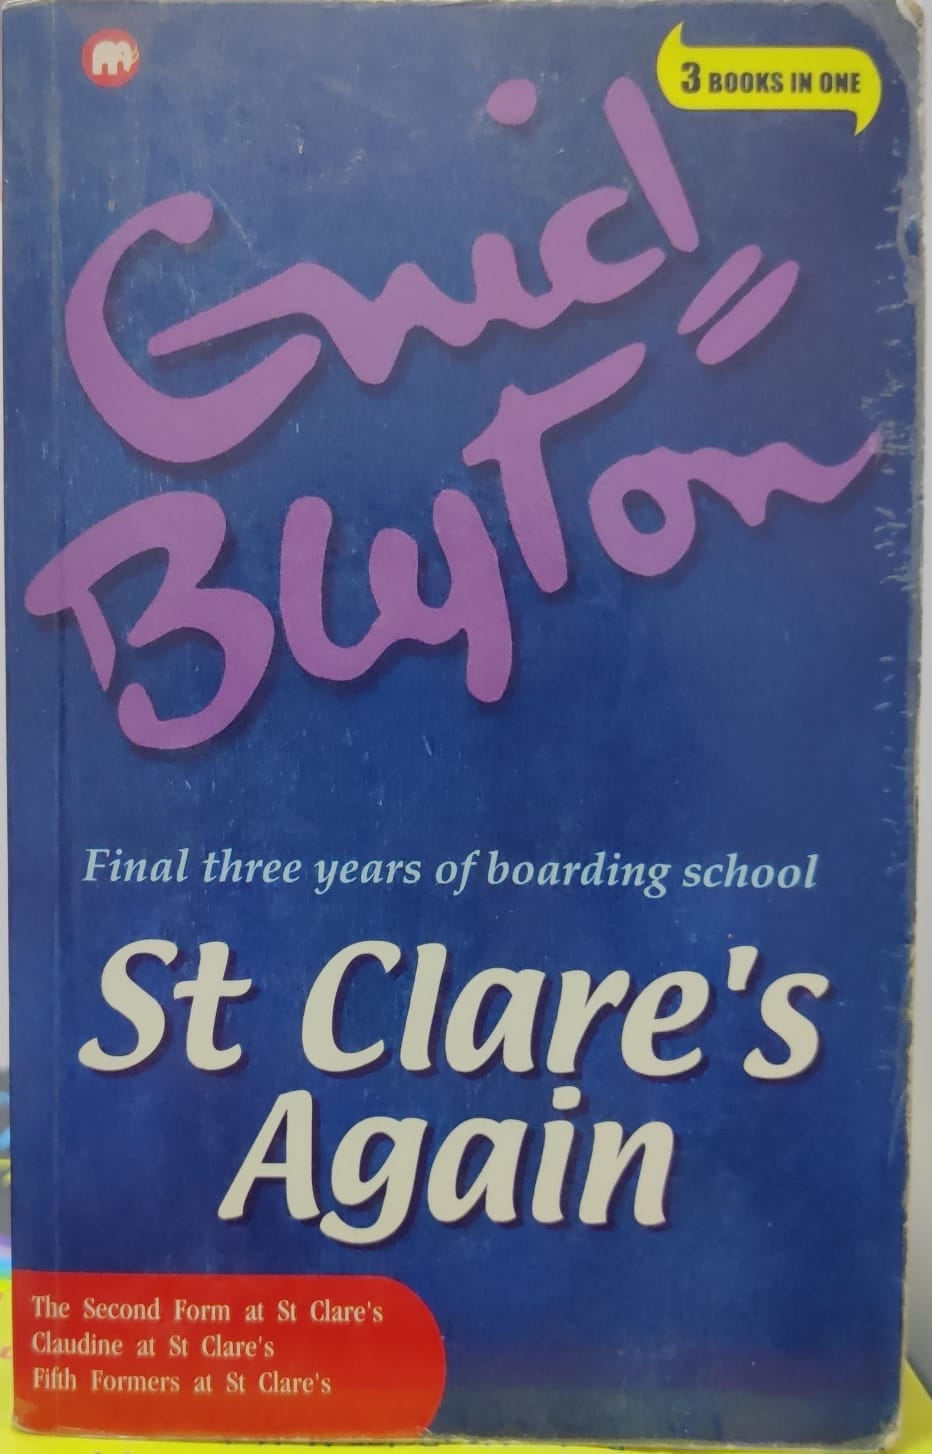 St Clare's again : final three years of boarding school : 3 in 1 books